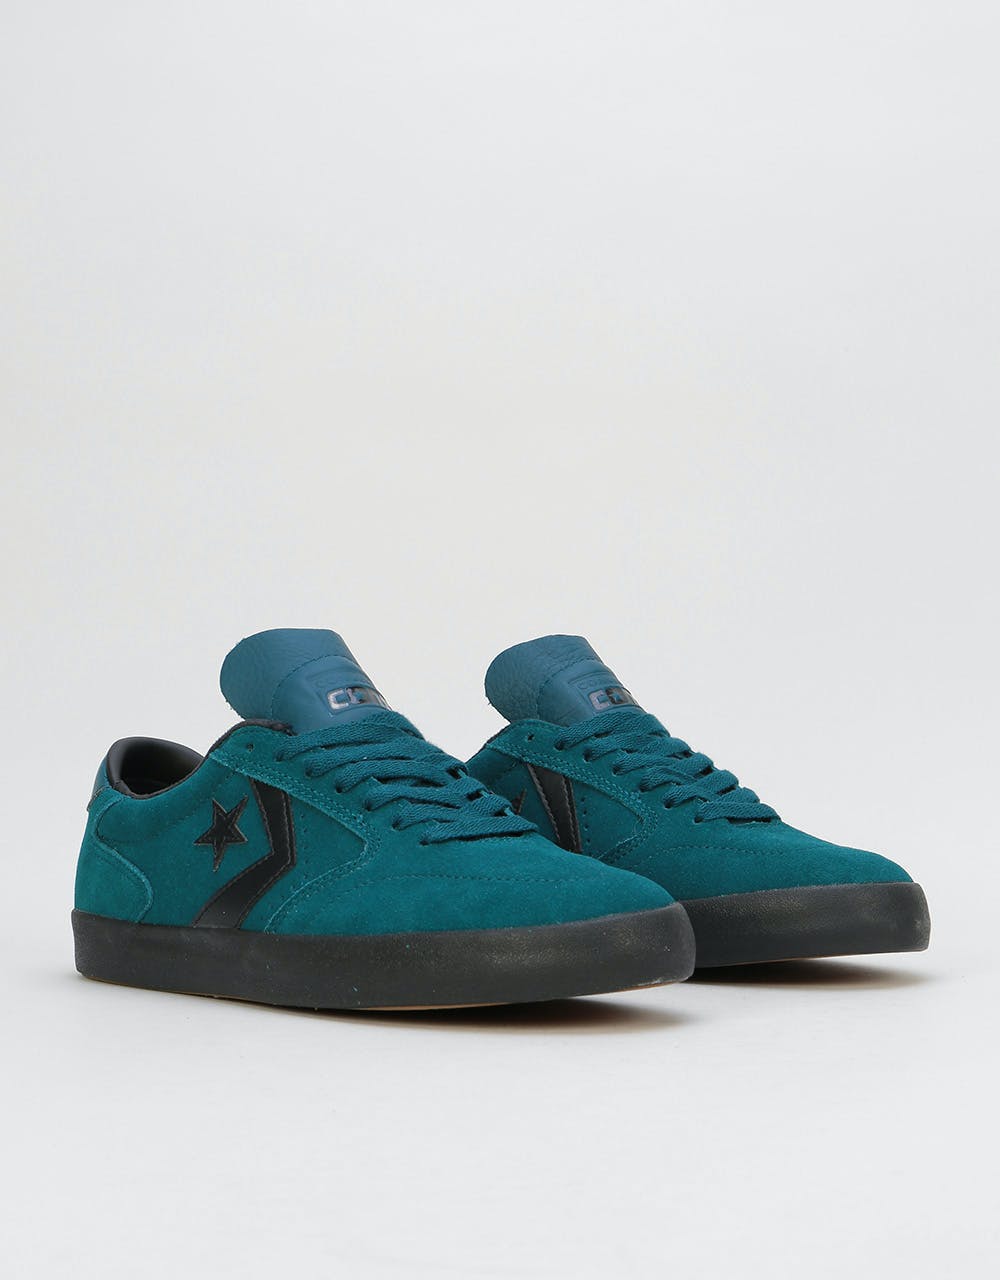 Converse Checkpoint Pro Skate Shoes - Midnight Turquoise/Black/Black